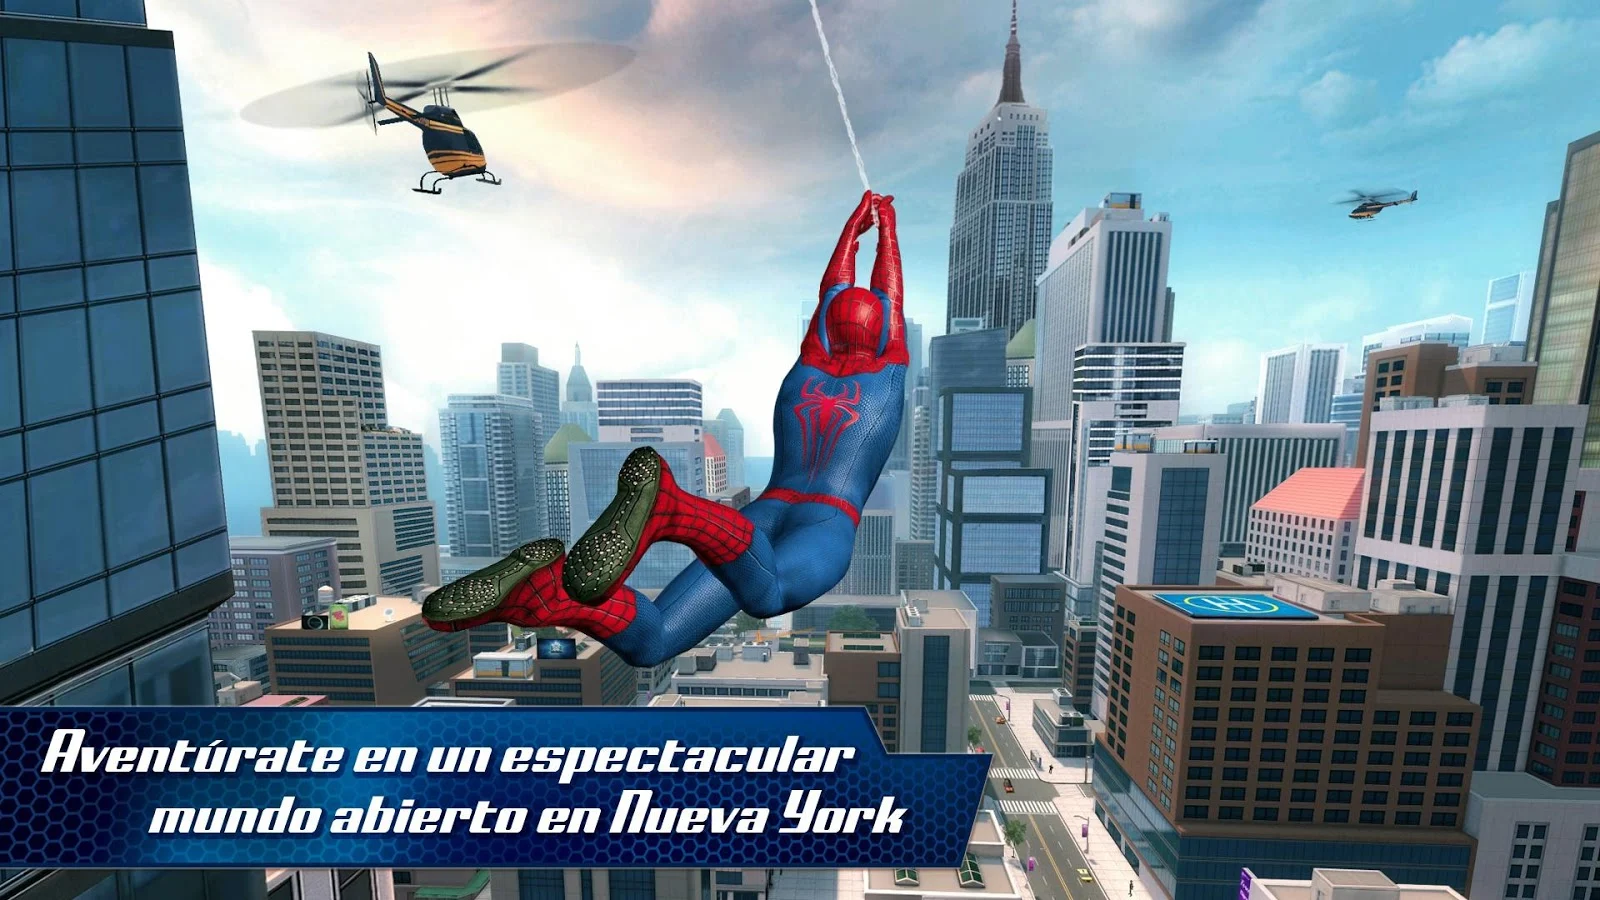 The Amazing Spider-Man 2 v1.0.1j APK Android Full